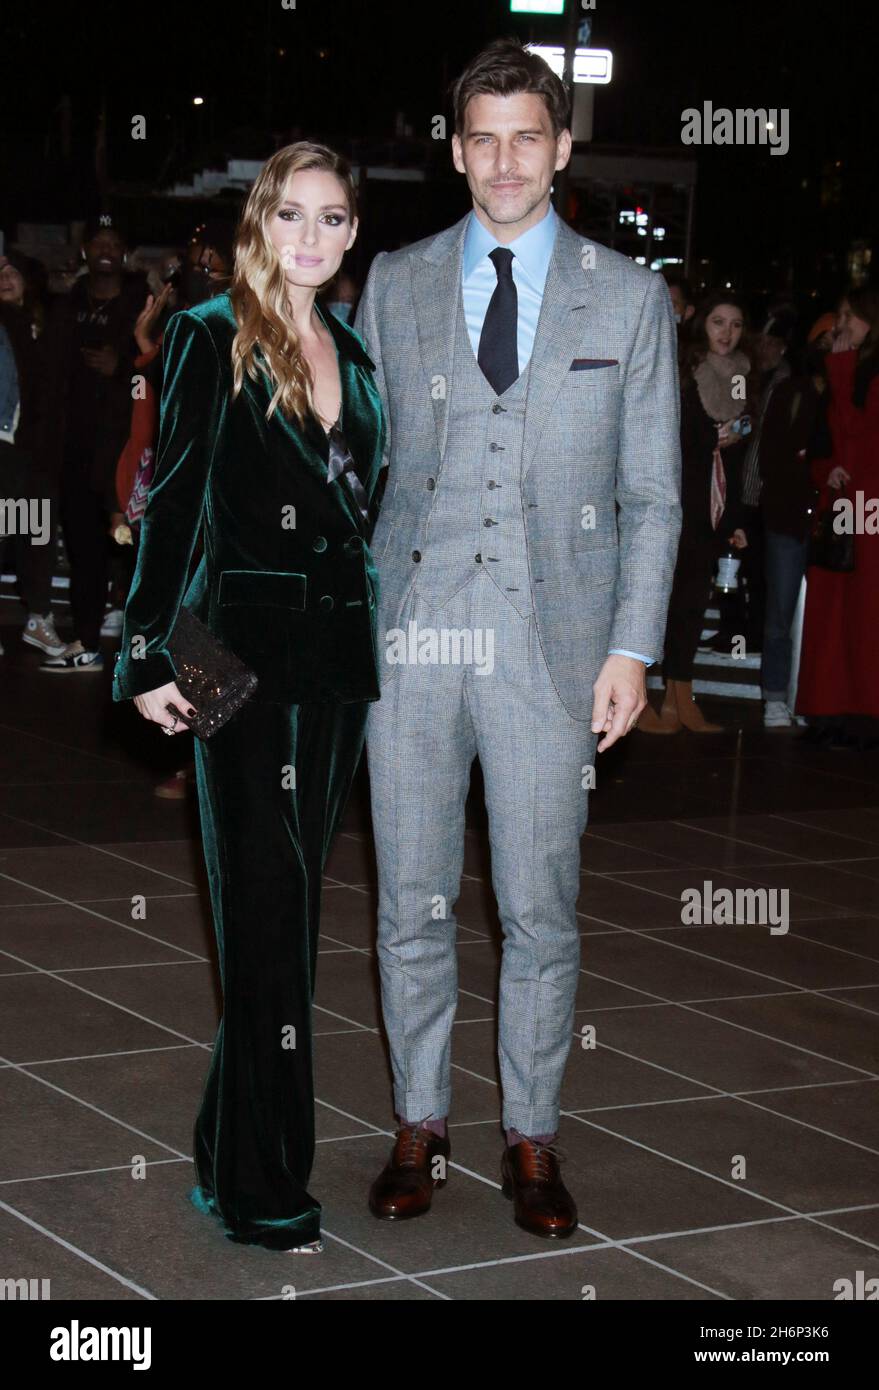 New York, NY, USA. 16th Nov, 2021. Olivia Palermo, Johannes Huebl arriving  to the premiere of House of Gucci at Jazz at Lincoln Center in New York  City on November 16, 2021.